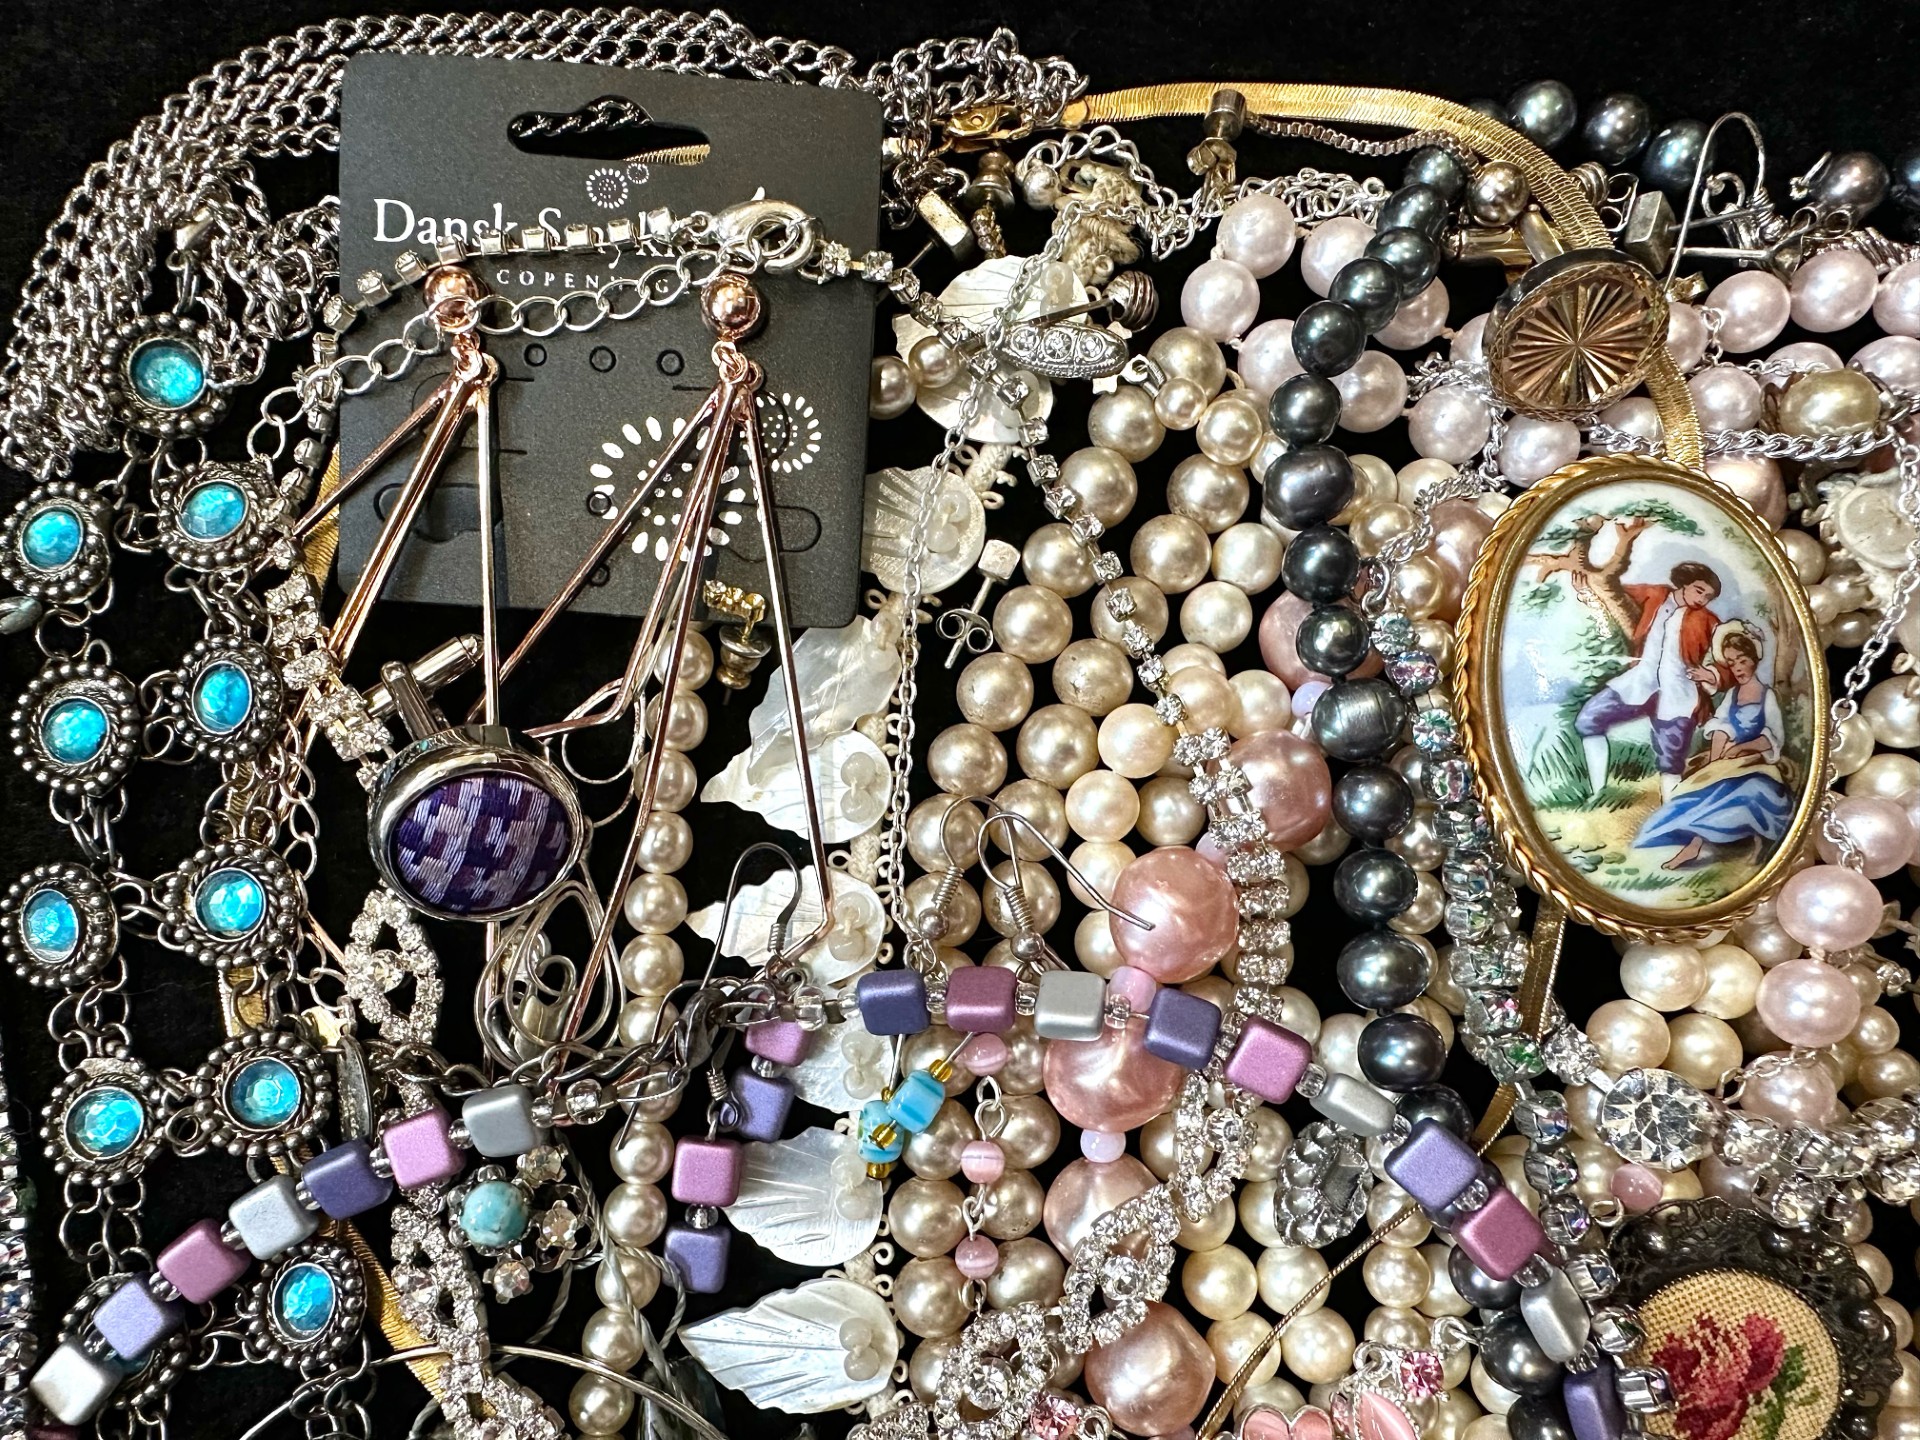 Collection of Quality Costume Jewellery, comprising beads, pearls, crystal set necklaces, shell - Image 4 of 5